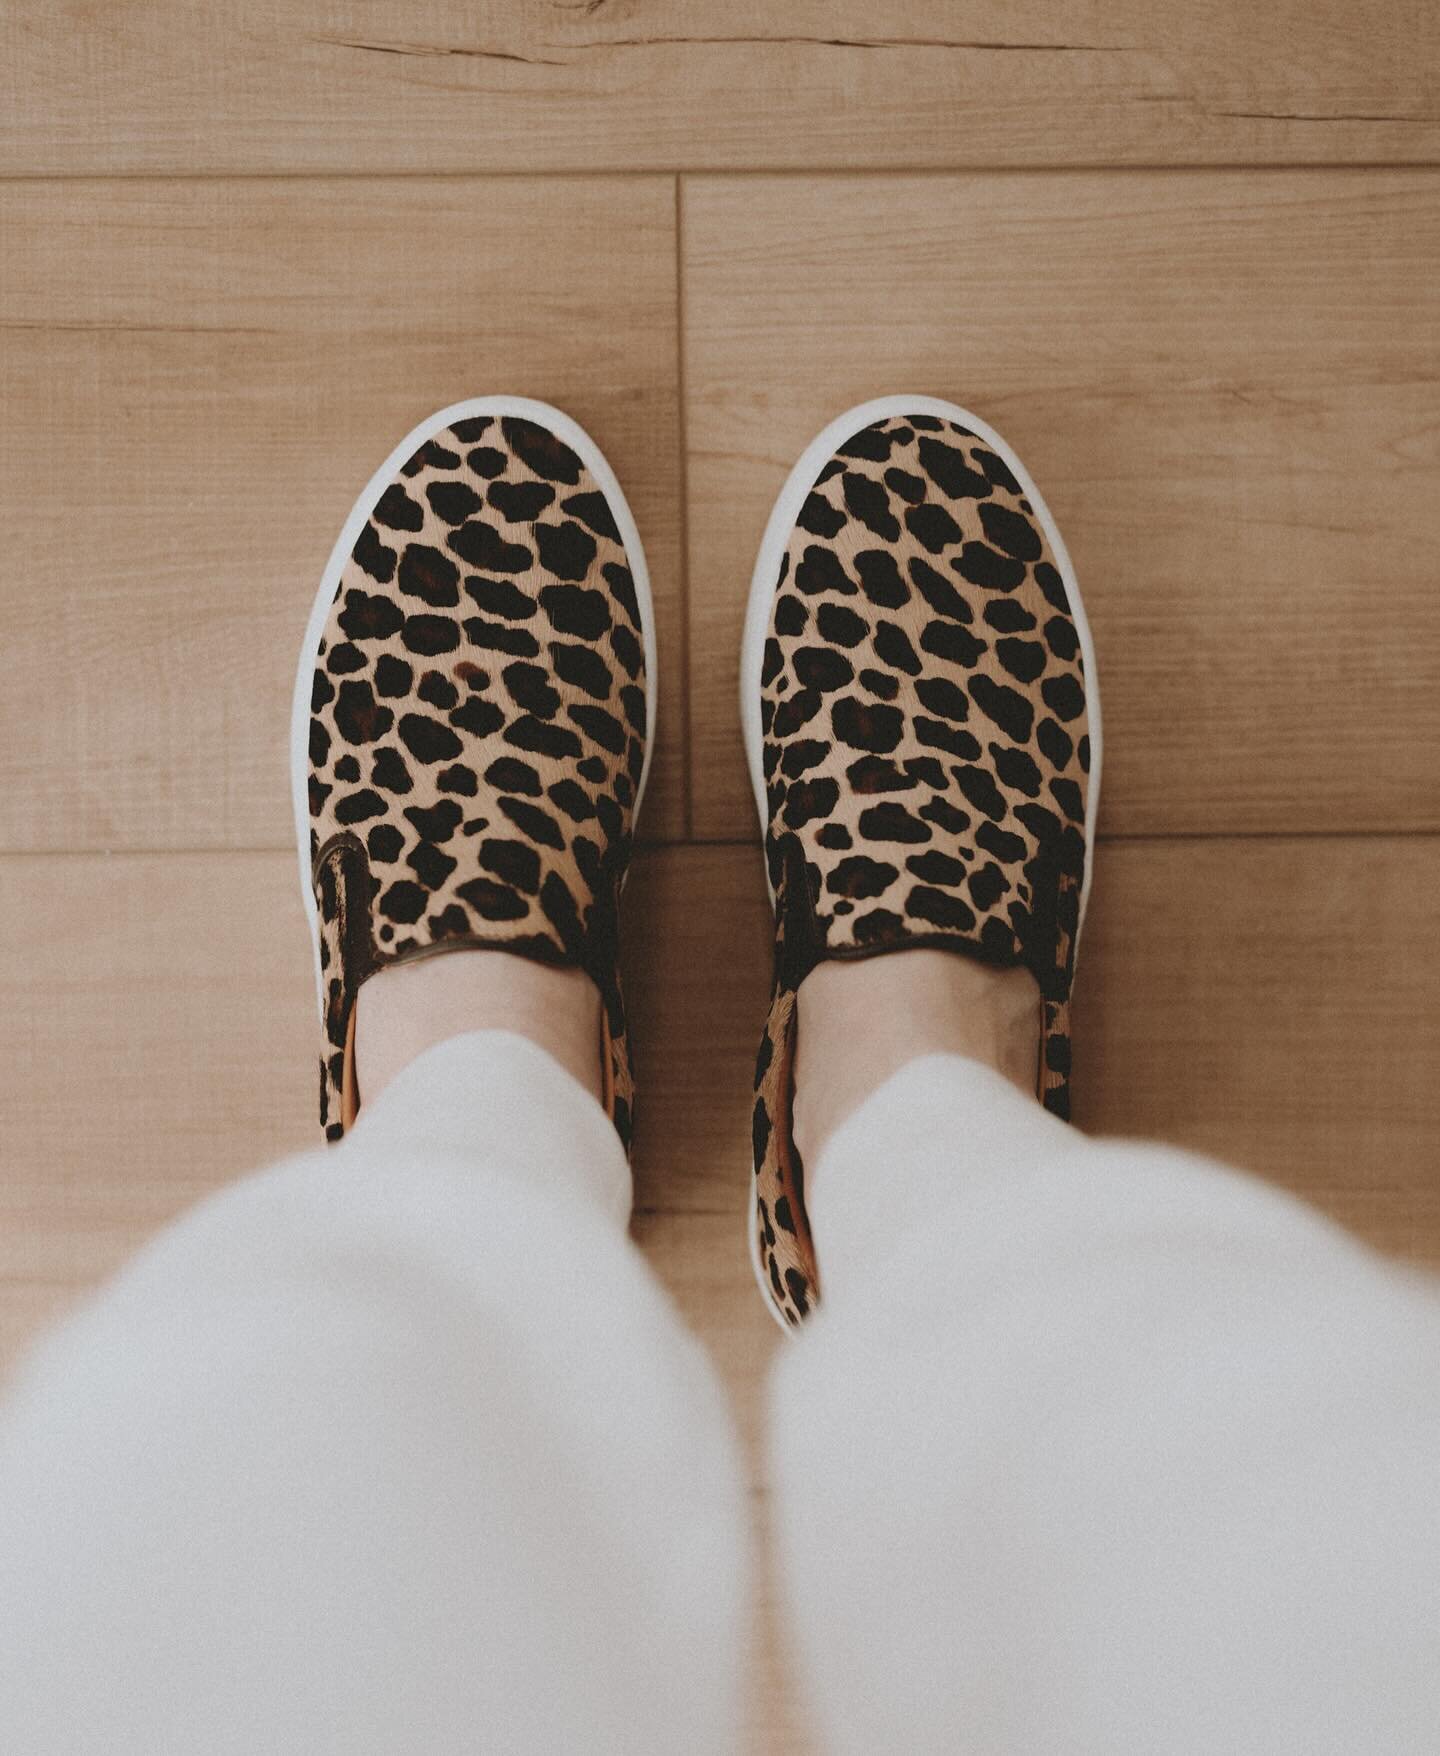 13:23 A leopard cannot change his spots 🐆

Follow @picturemaryna for beautiful curations, styling &amp; product photography ☺️
#marynaholovanova for @sezane 
#sezanelovers #sezaneaddict #sezane 
#leopard #cheetah #leopardprint #cheetahprint 
#spring